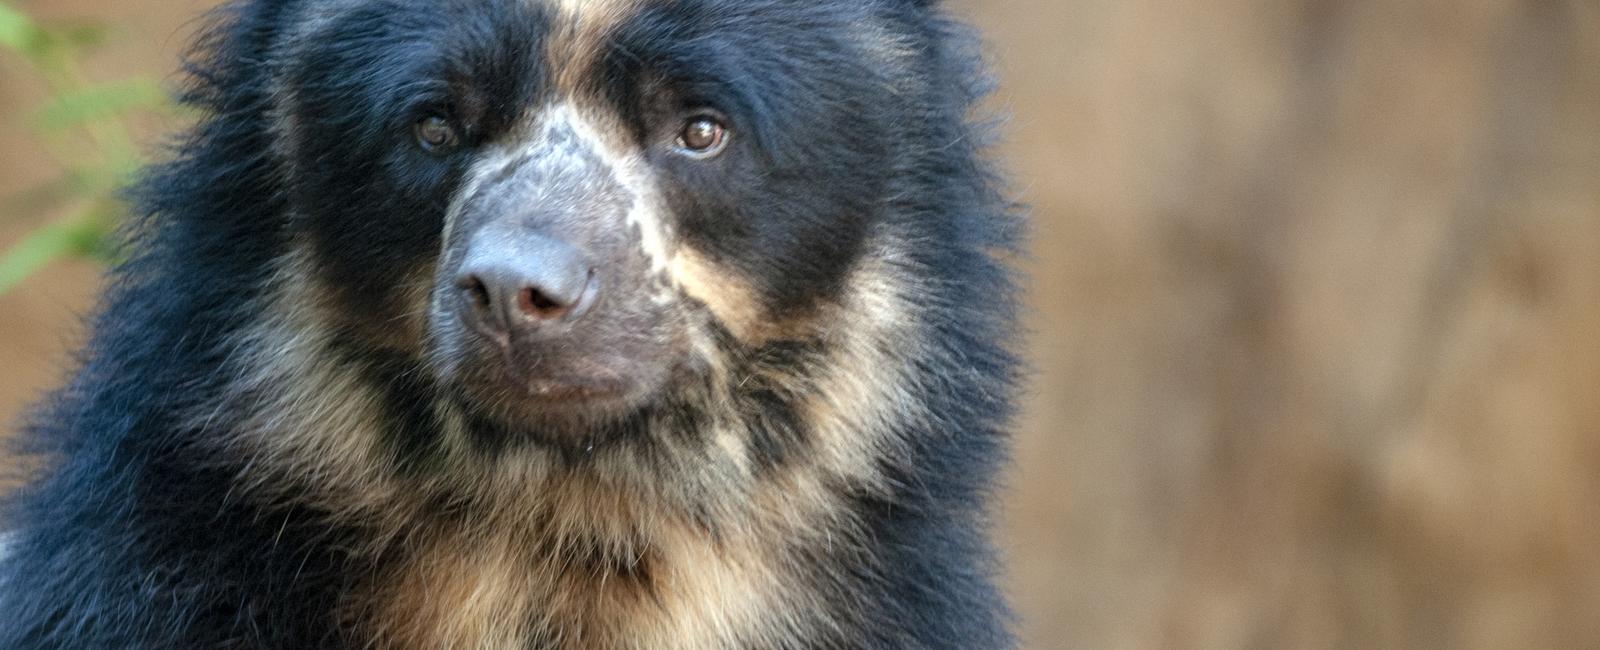 The spectacled bear or andean bear is the only bear species you ll find in the southern hemisphere in the andes mountains of south america the rest of the world s bear species live in the northern hemisphere